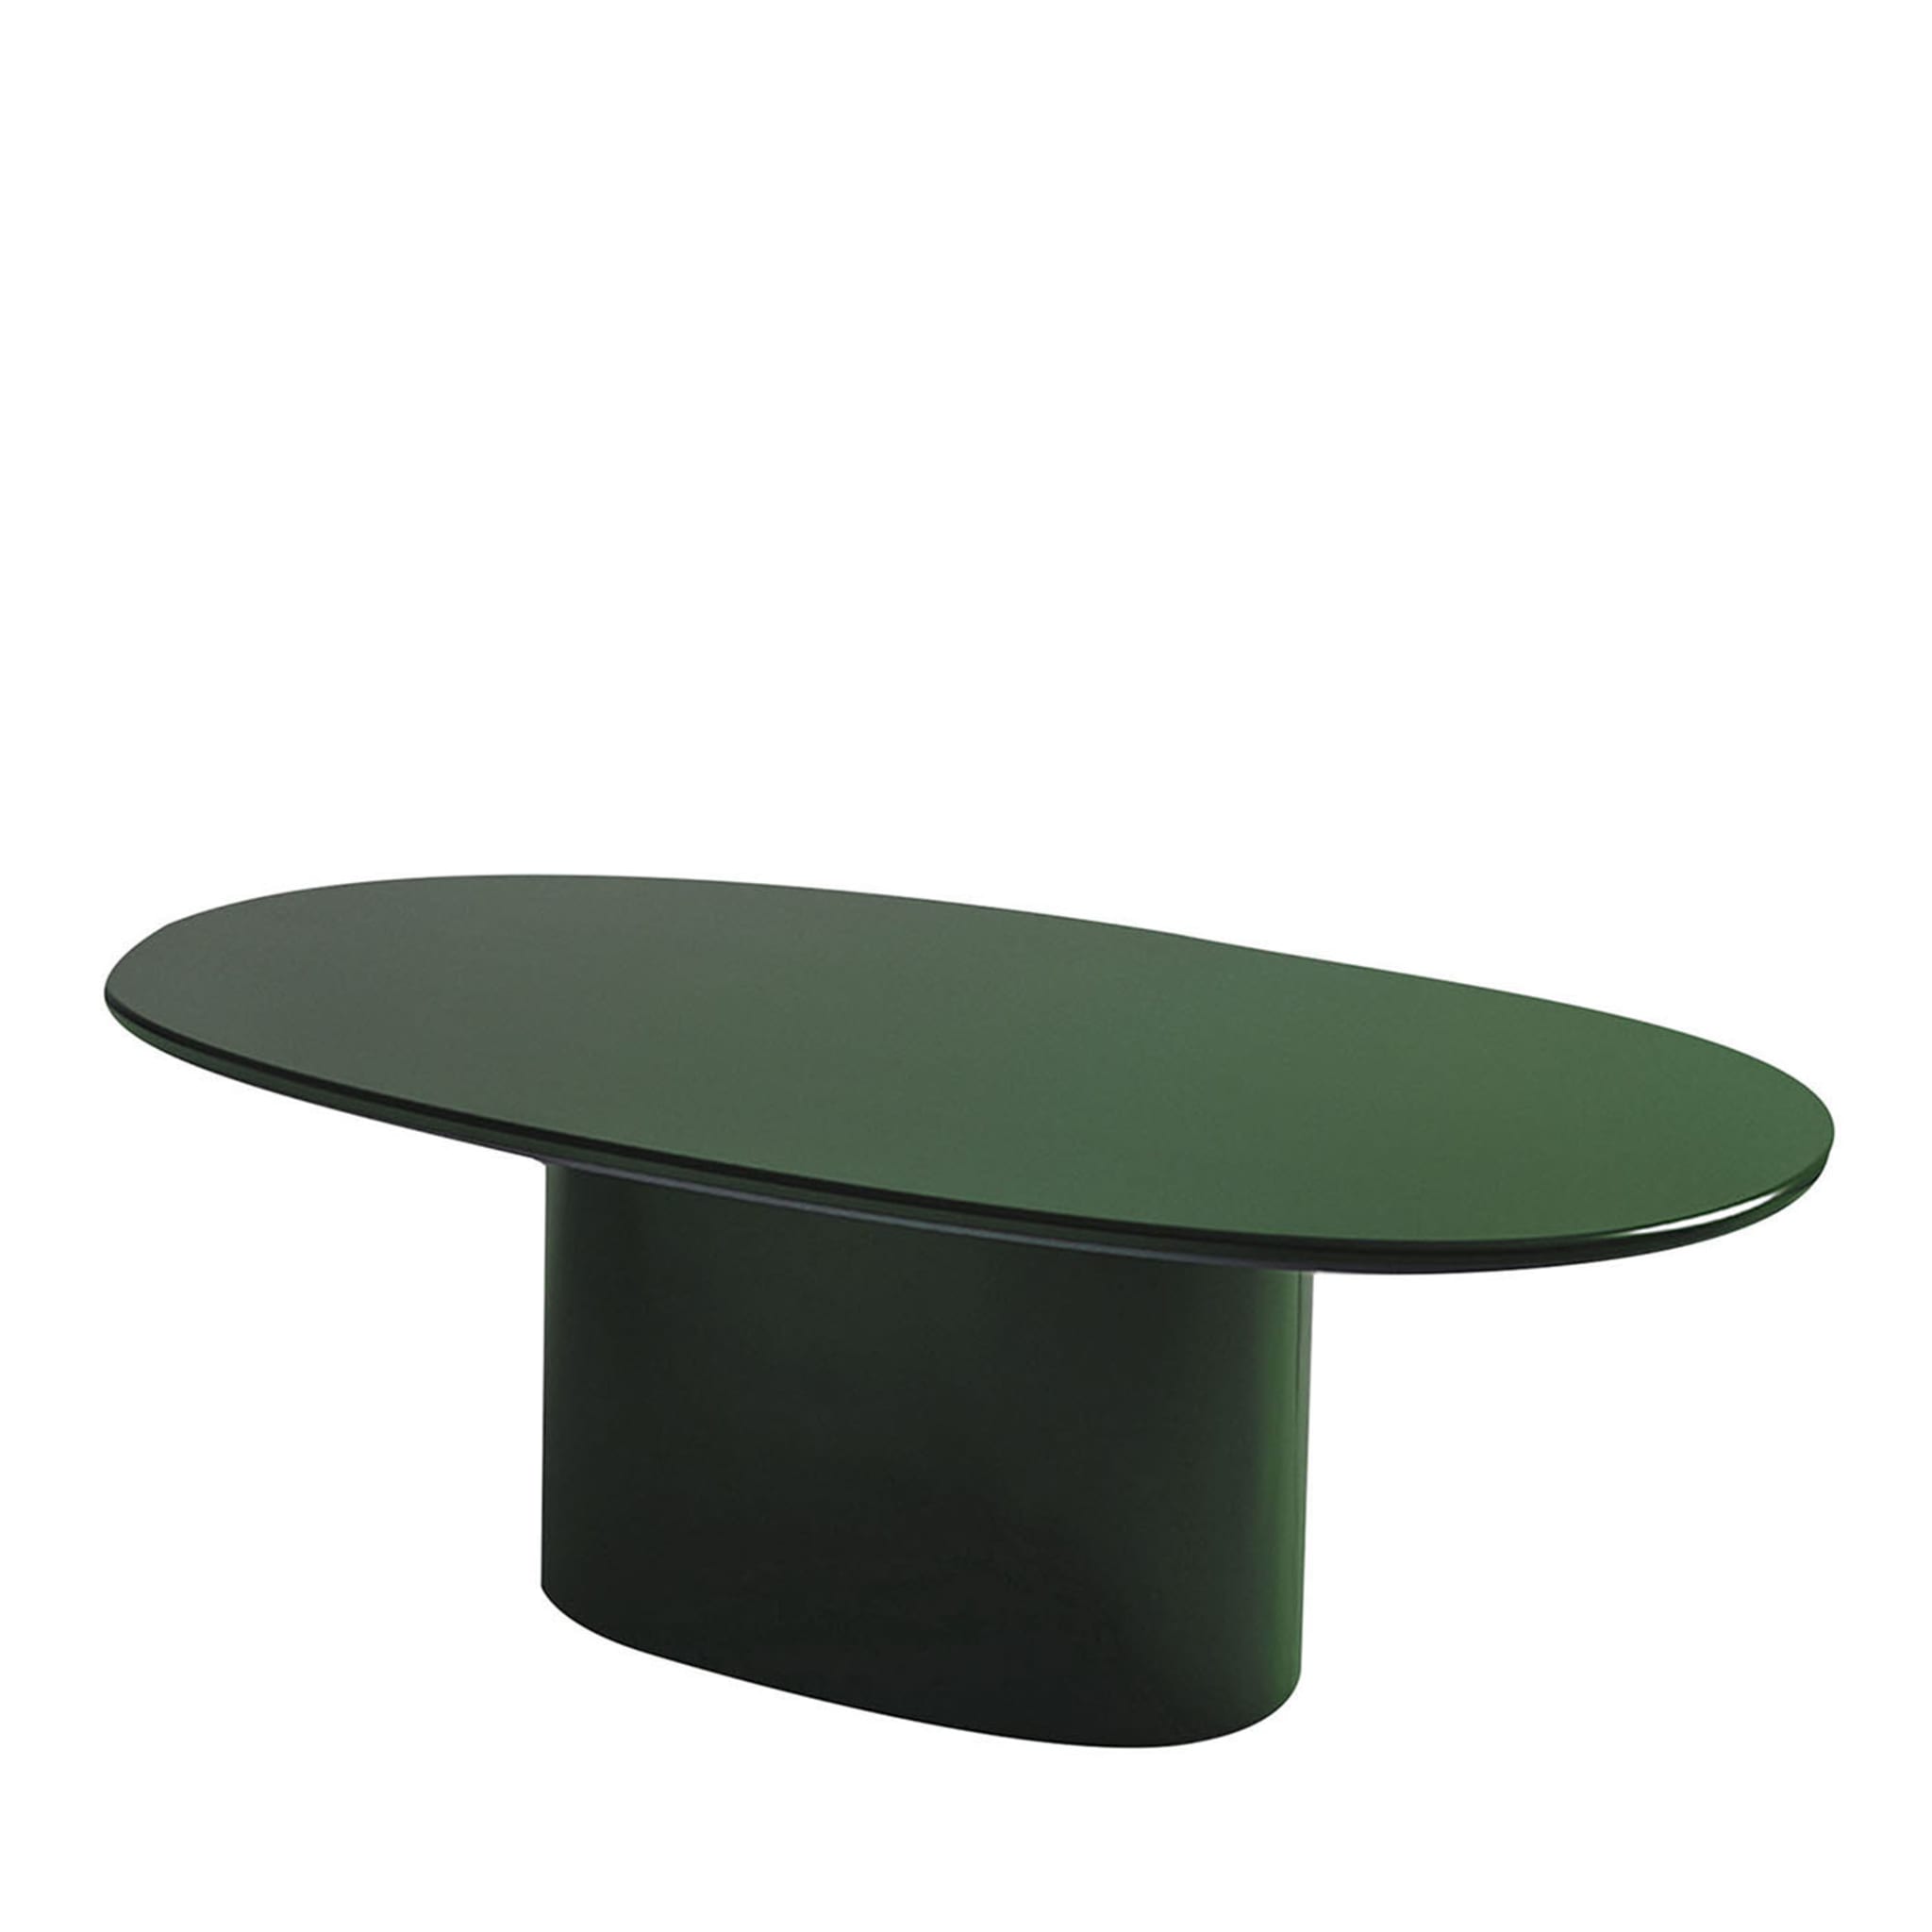 Oku Oval Green Dining Table by Federica Biasi - Main view